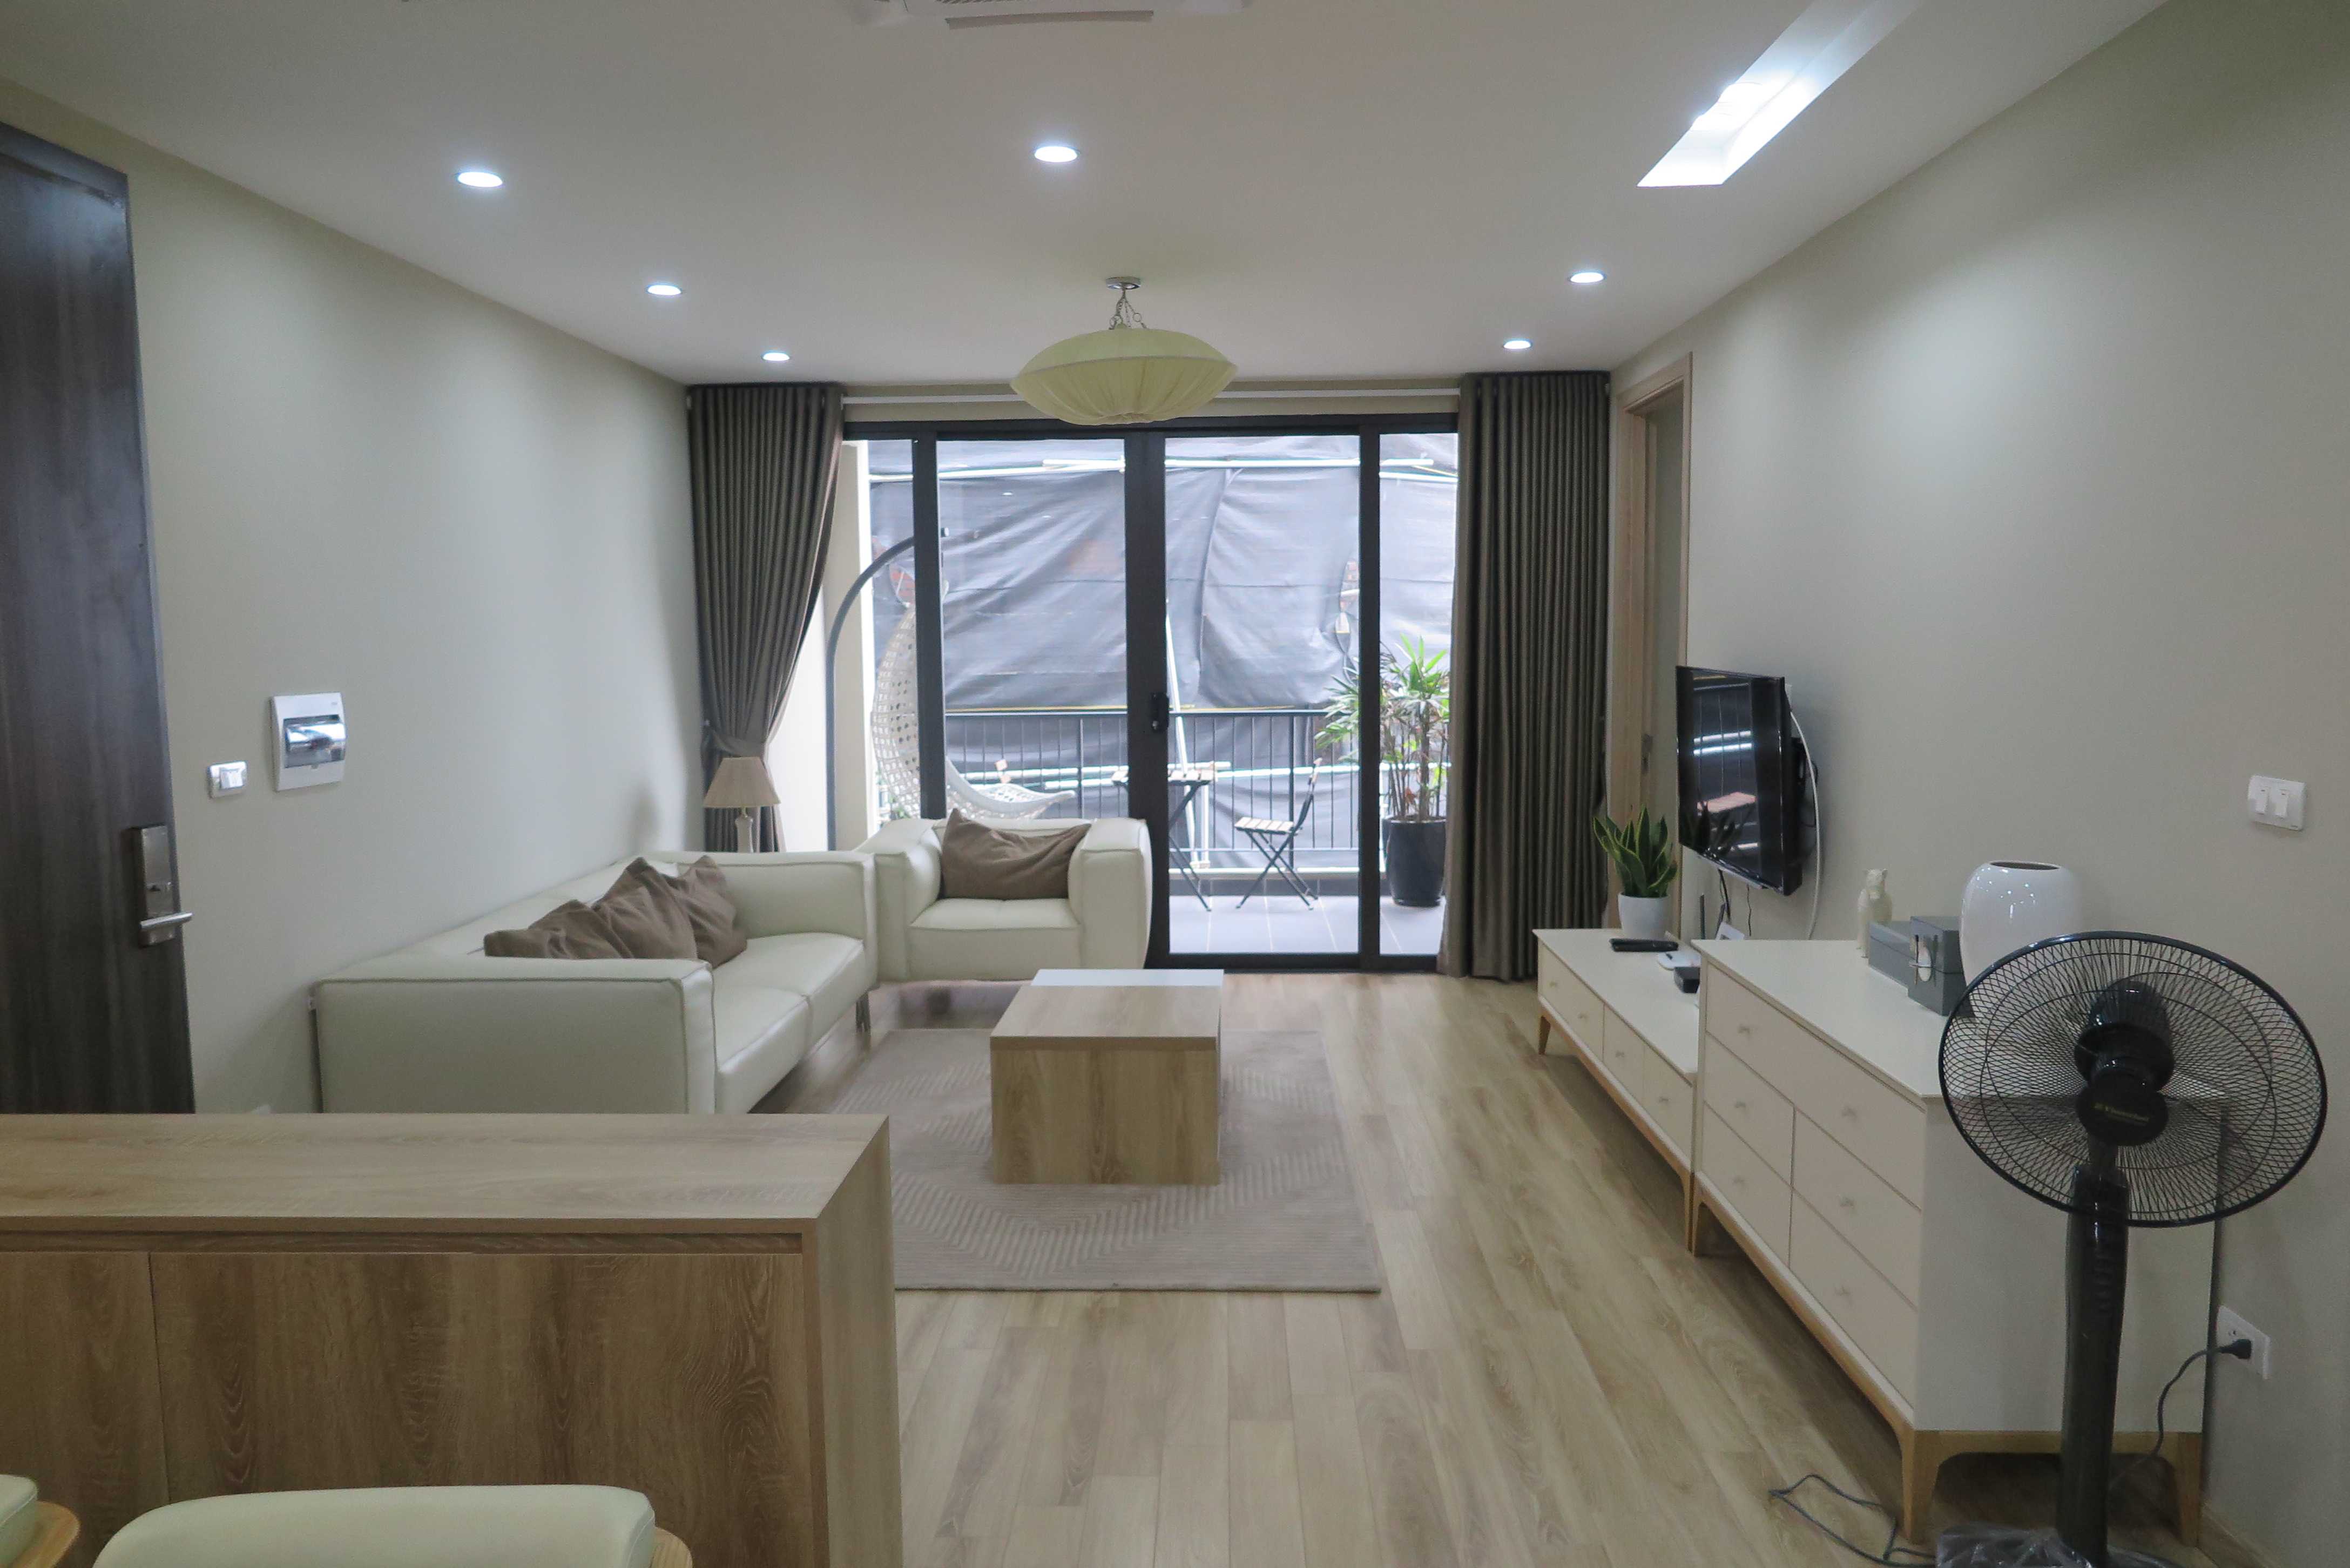 Serviced apartment  with West Lake view, European style in Vong Thi, Tay Ho dist for rent